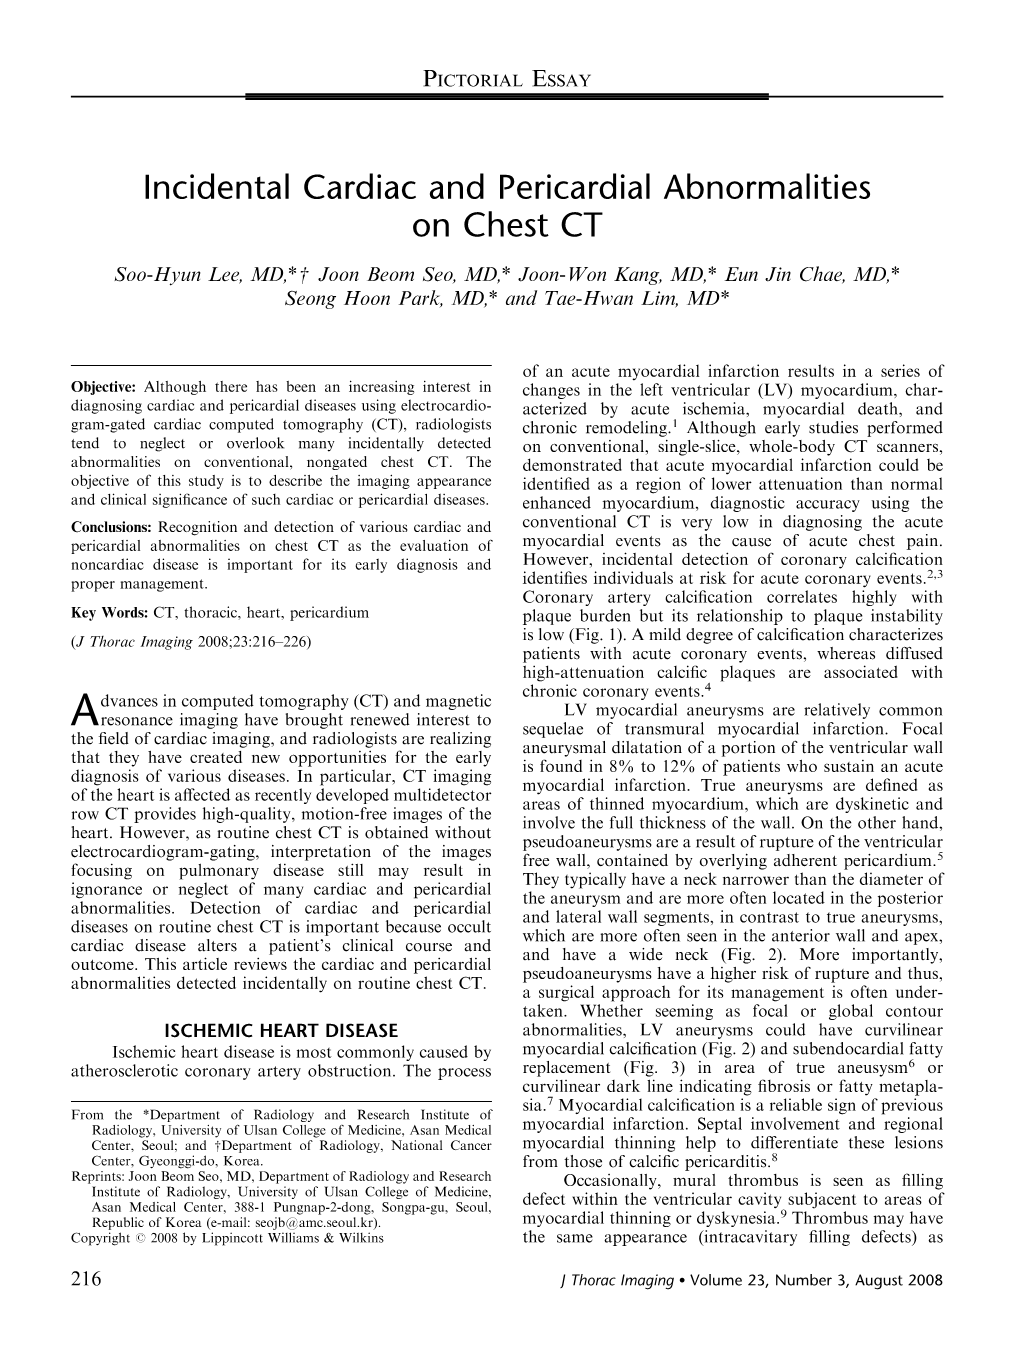 Incidental Cardiac and Pericardial Abnormalities on Chest CT